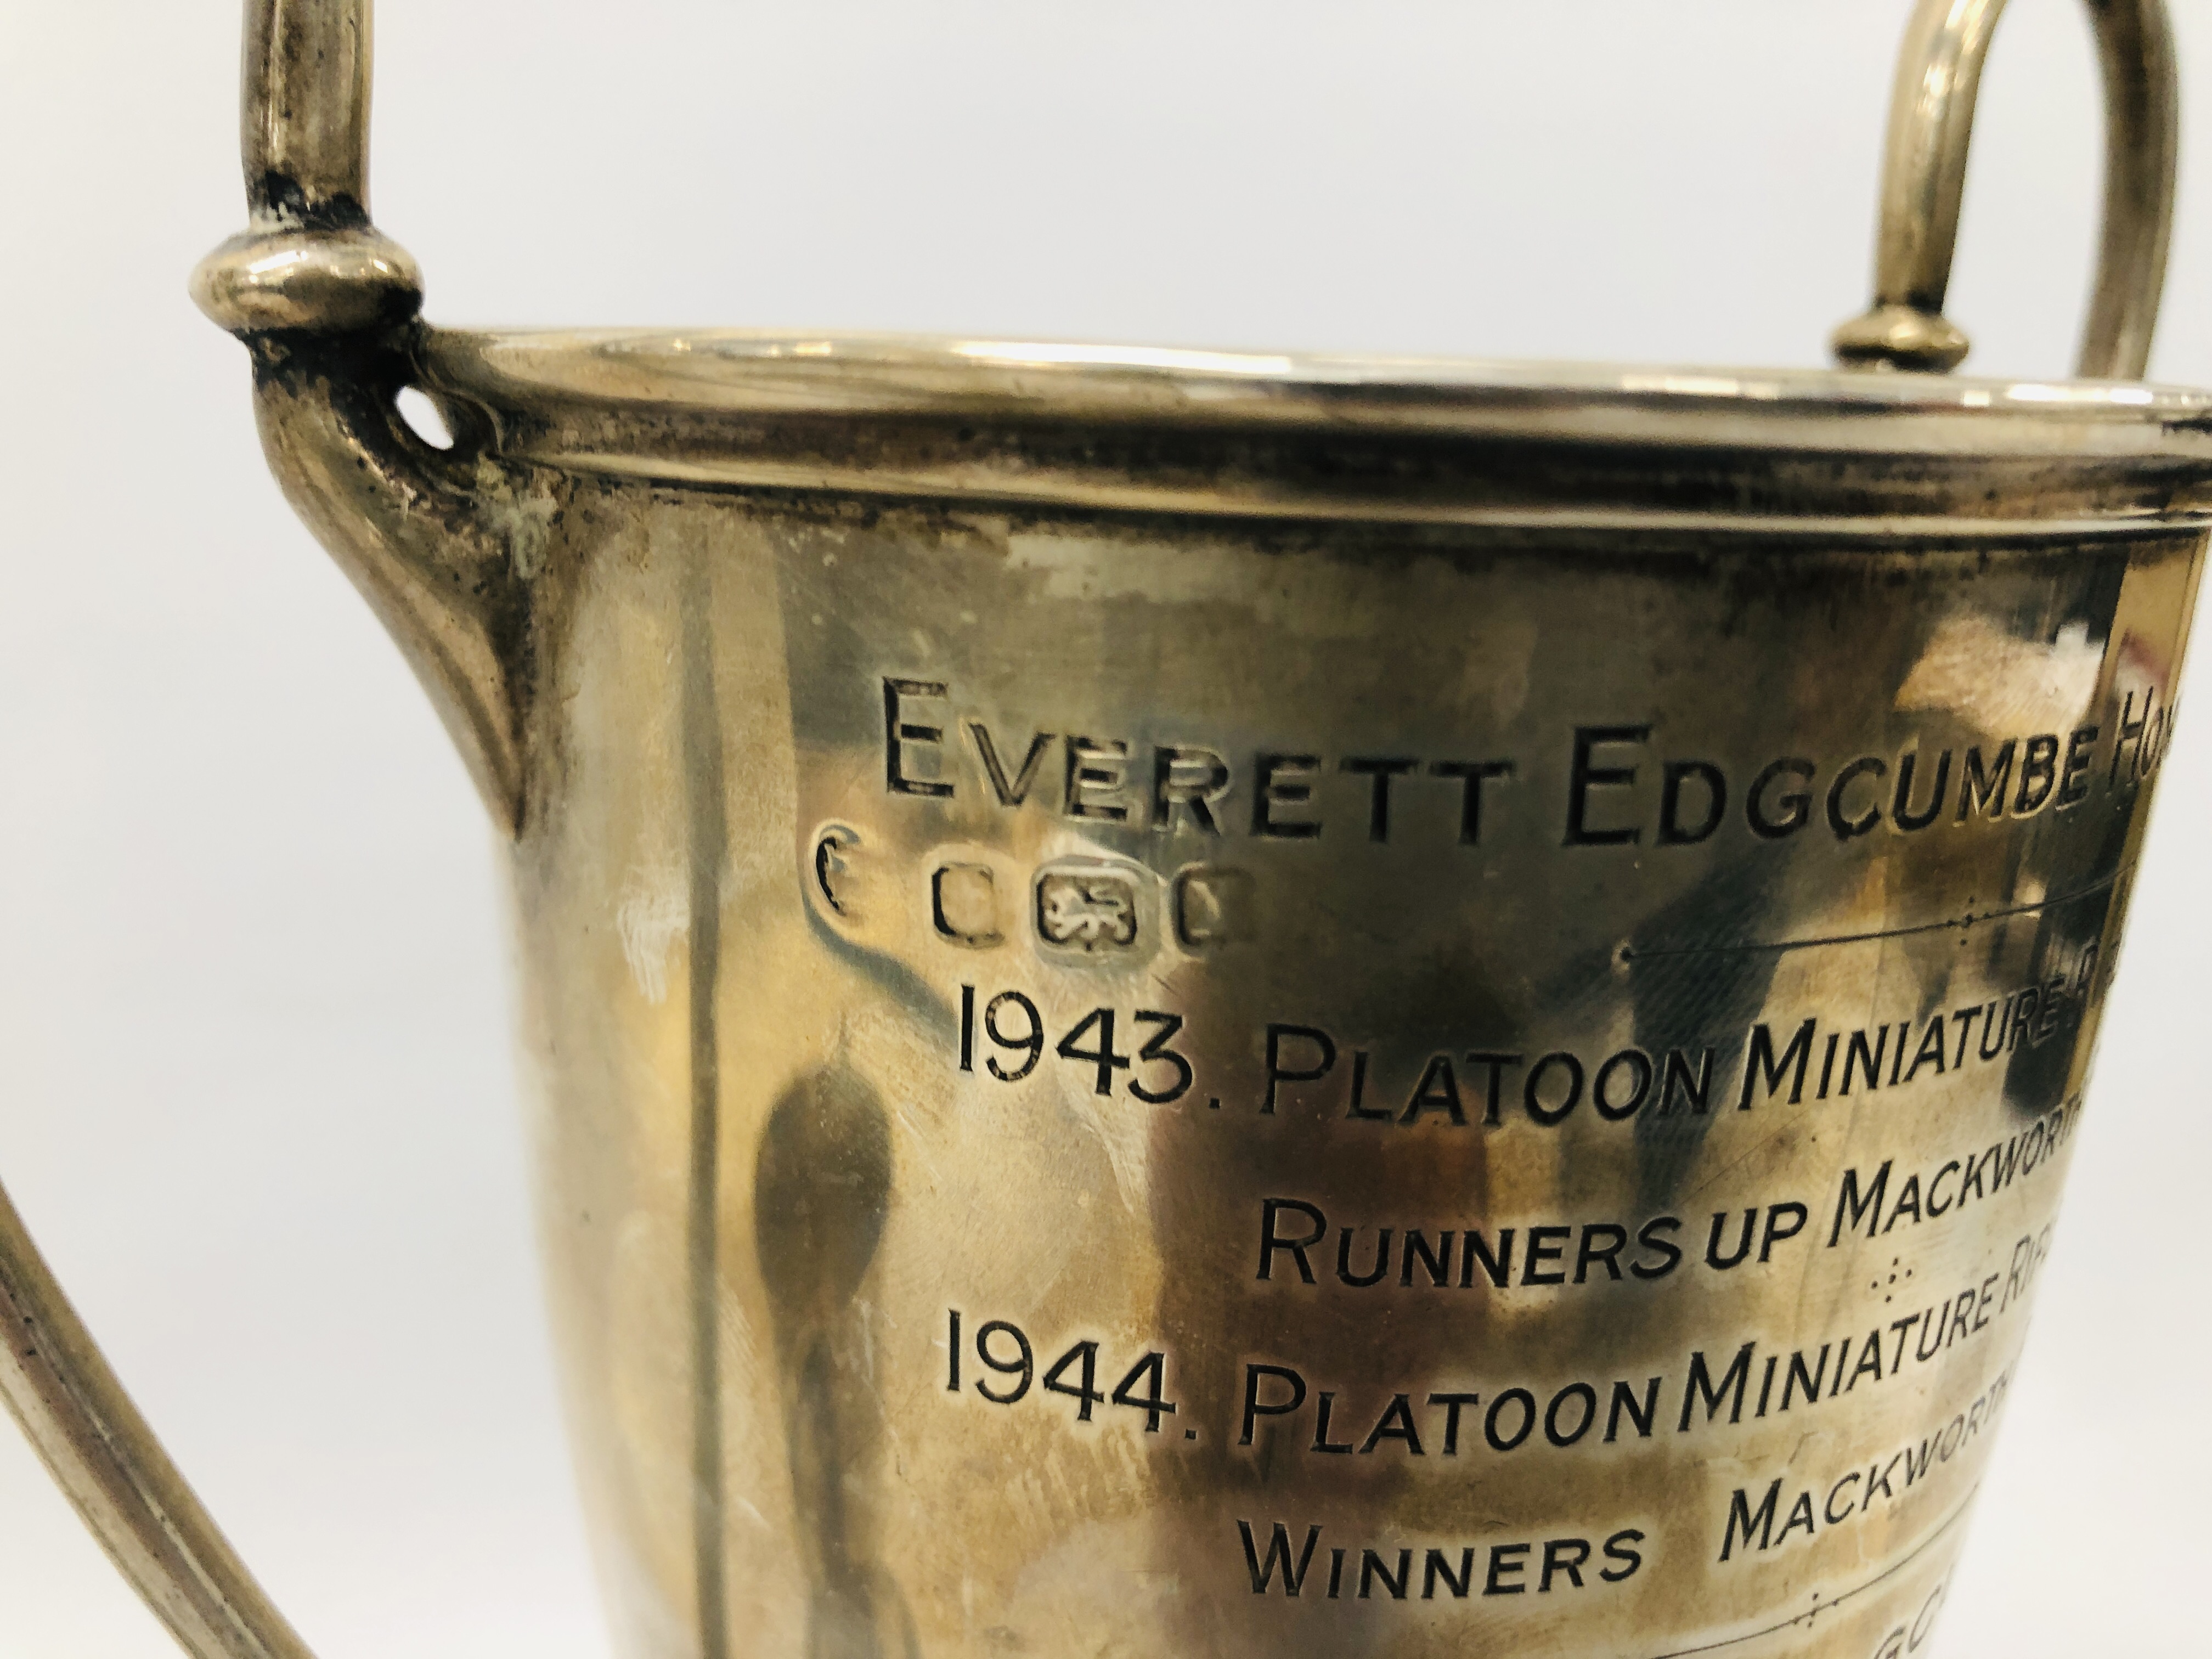 AN ANTIQUE TWO HANDLED SILVER PRESENTATION CUP BEARING INSCRIPTION RELATING TO THE PLATOON - Image 6 of 14